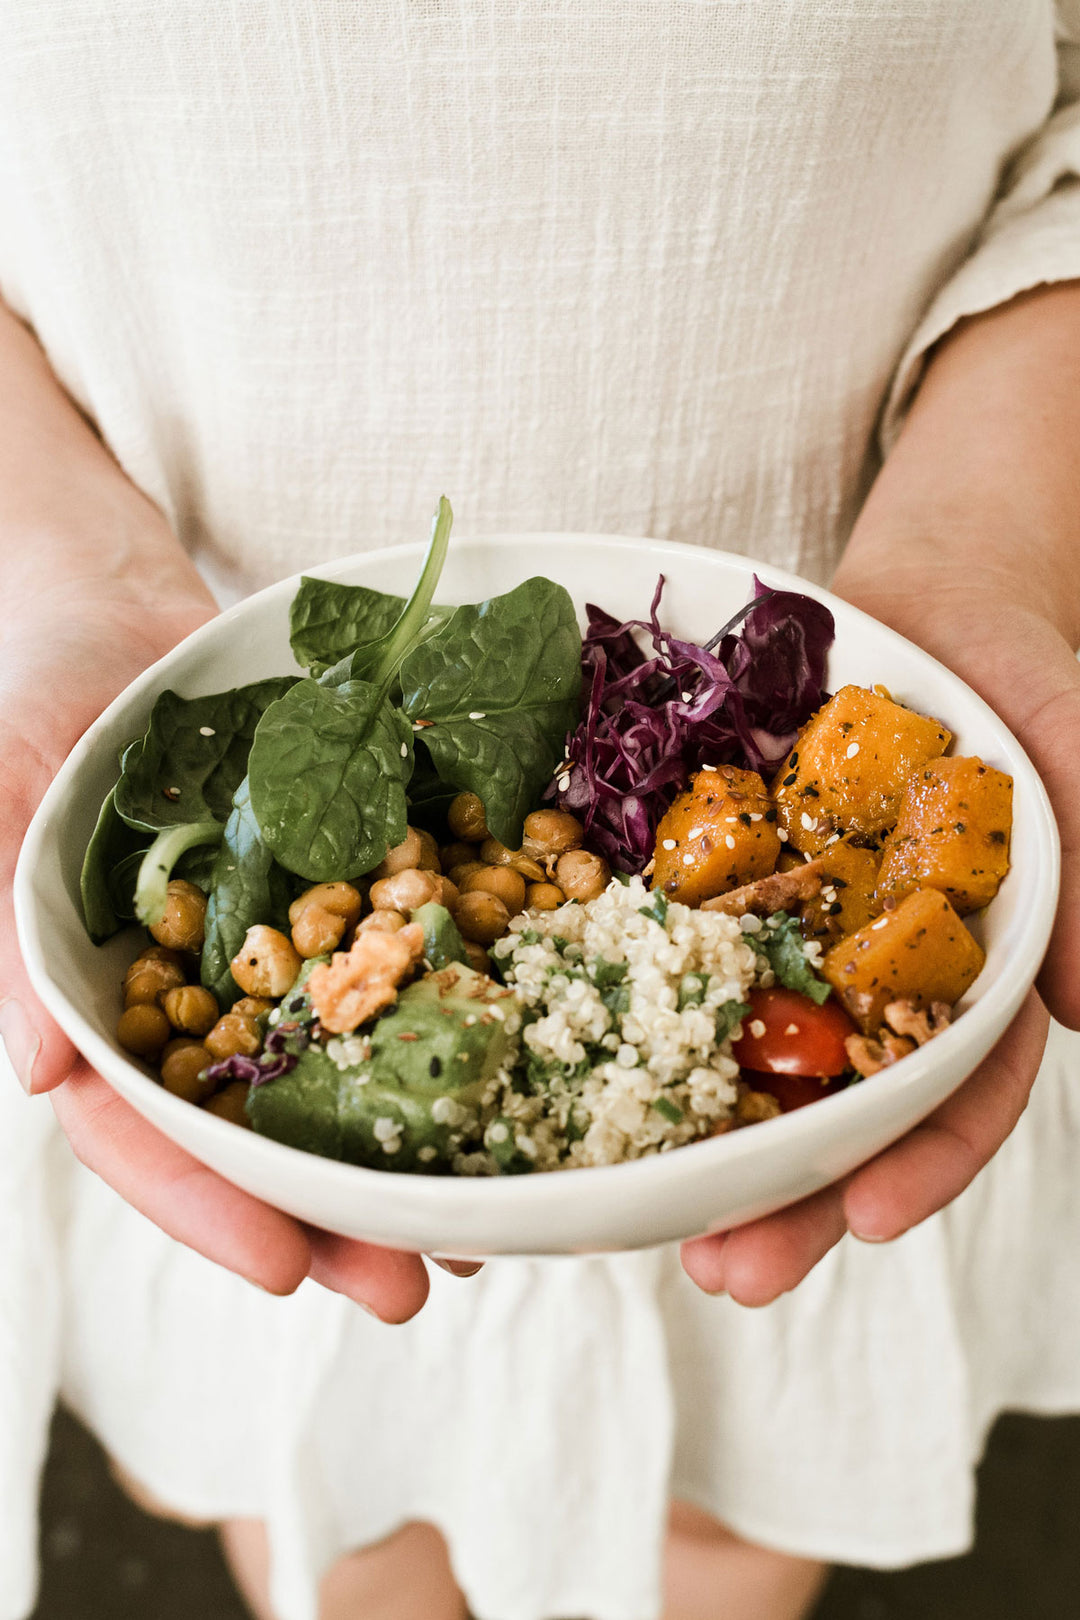 One bowl: A guide to eating more mindfully